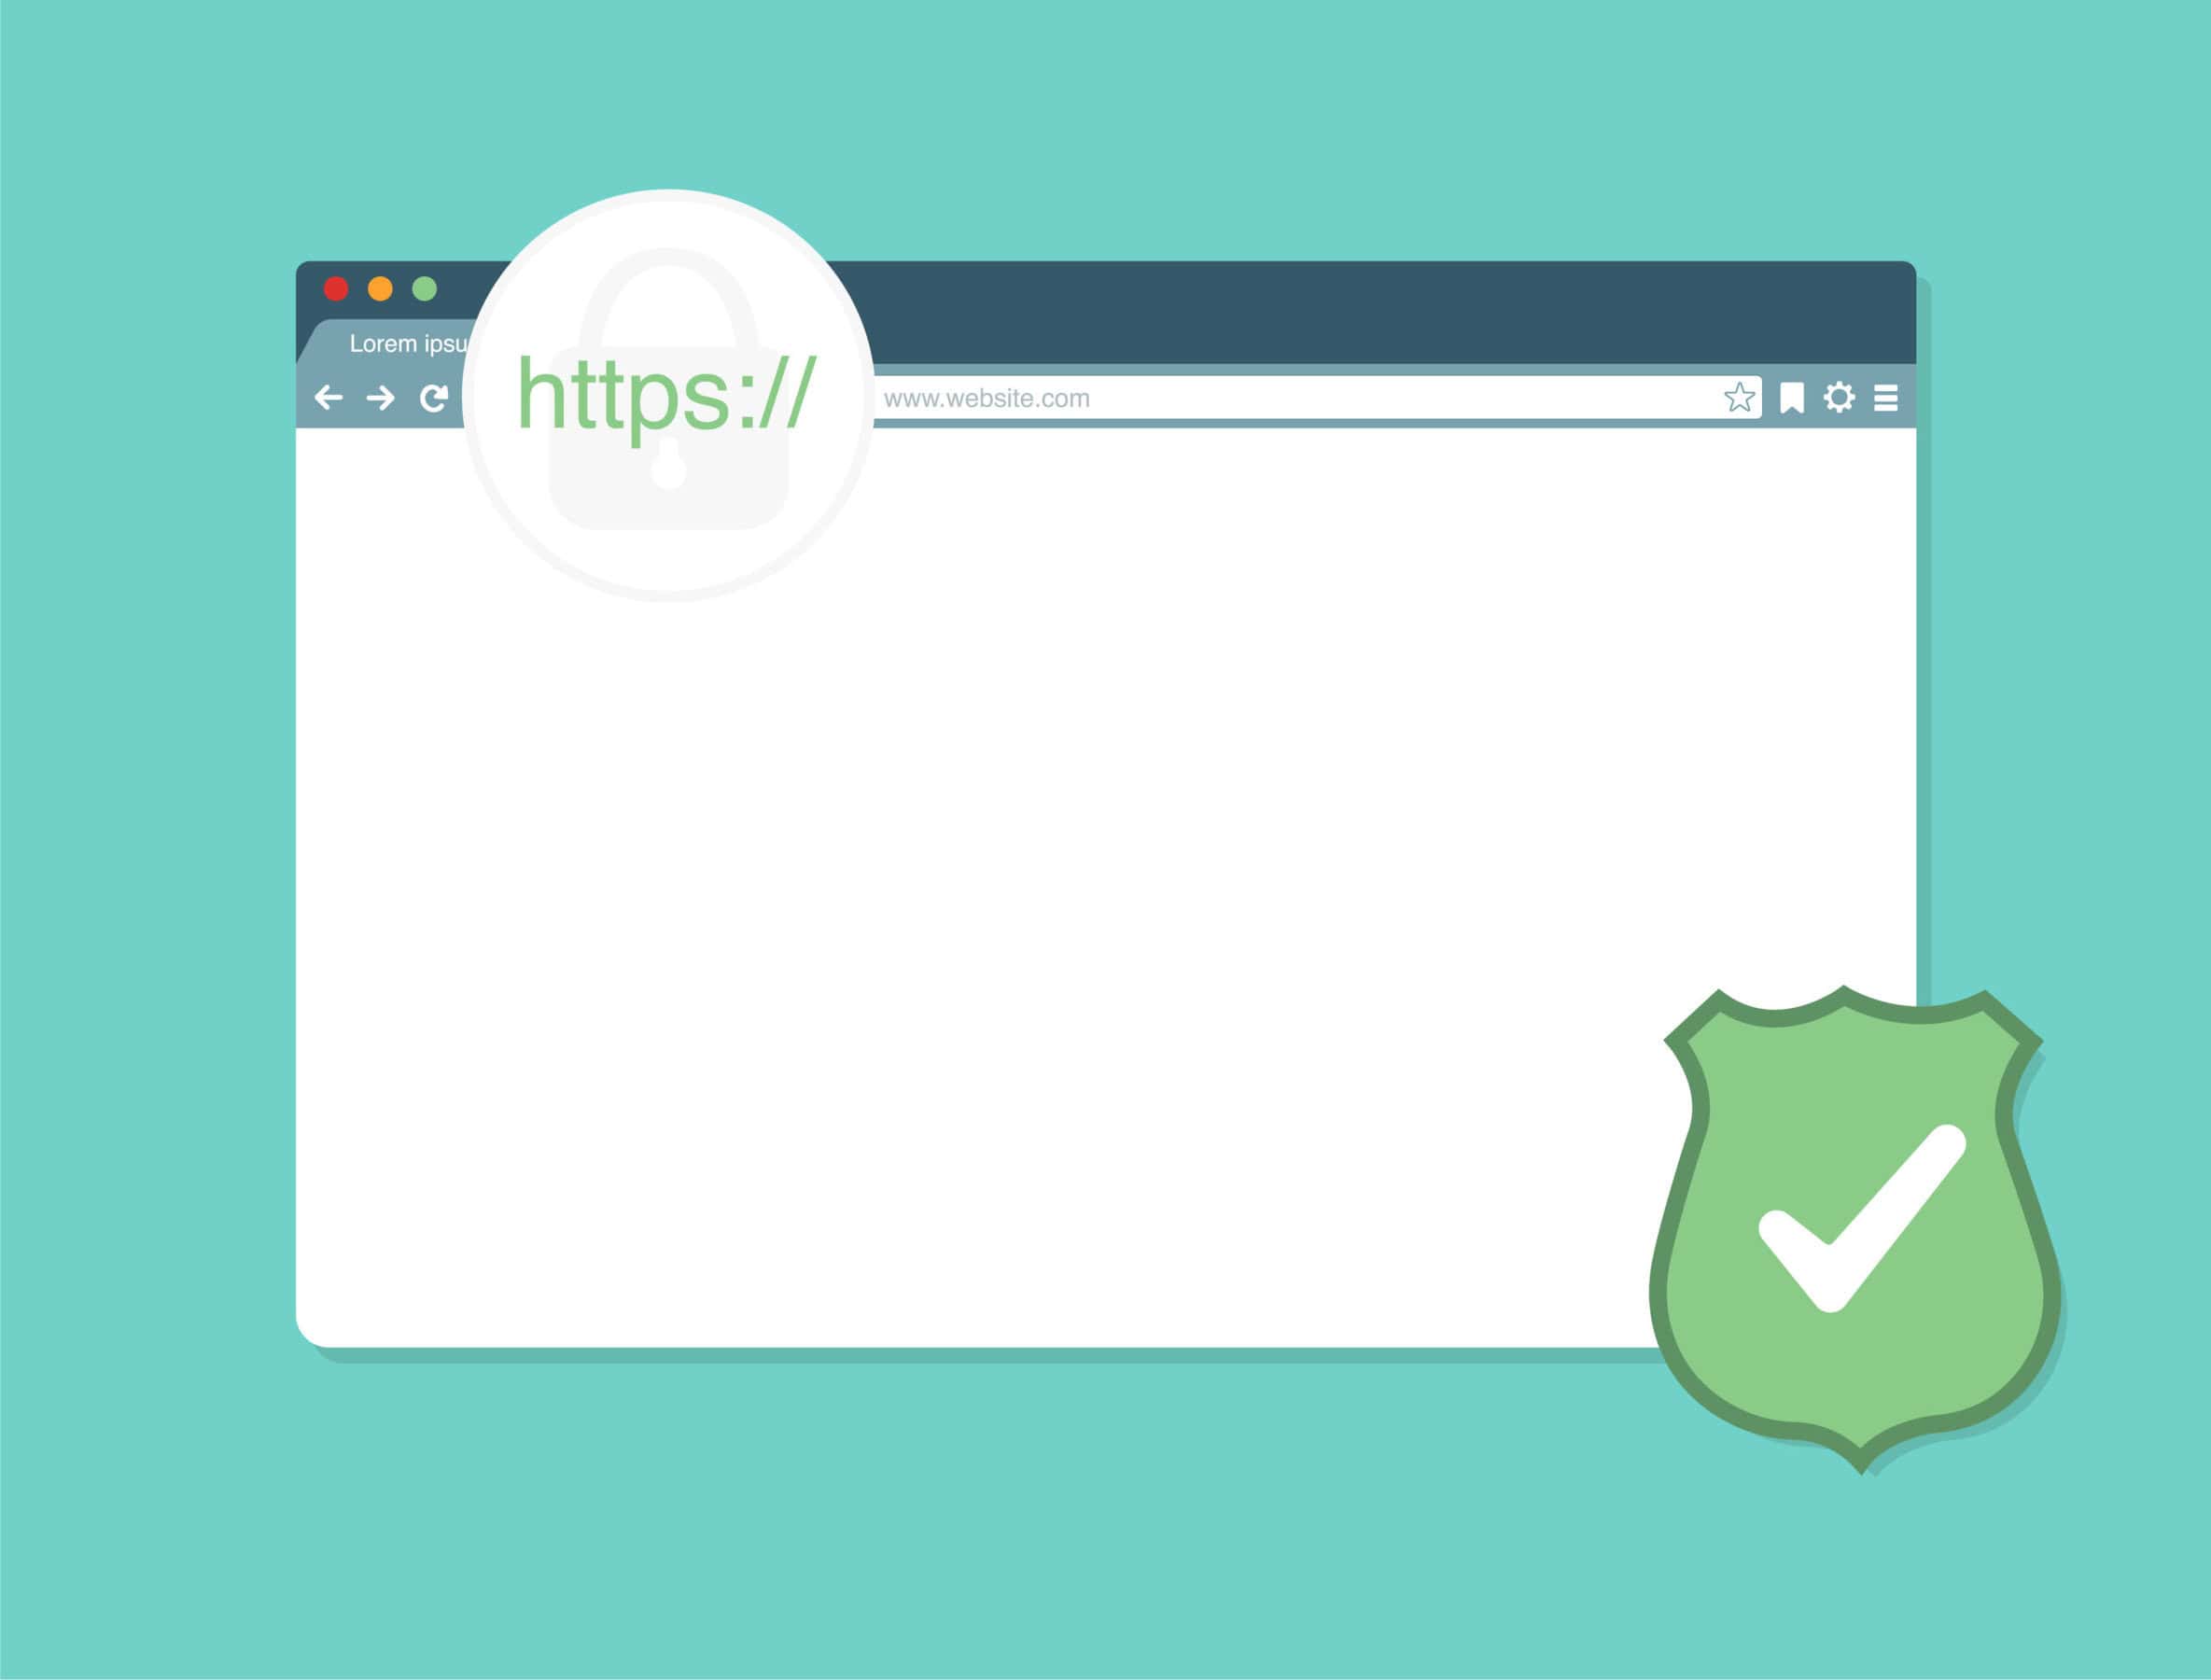 https ssl security scaled